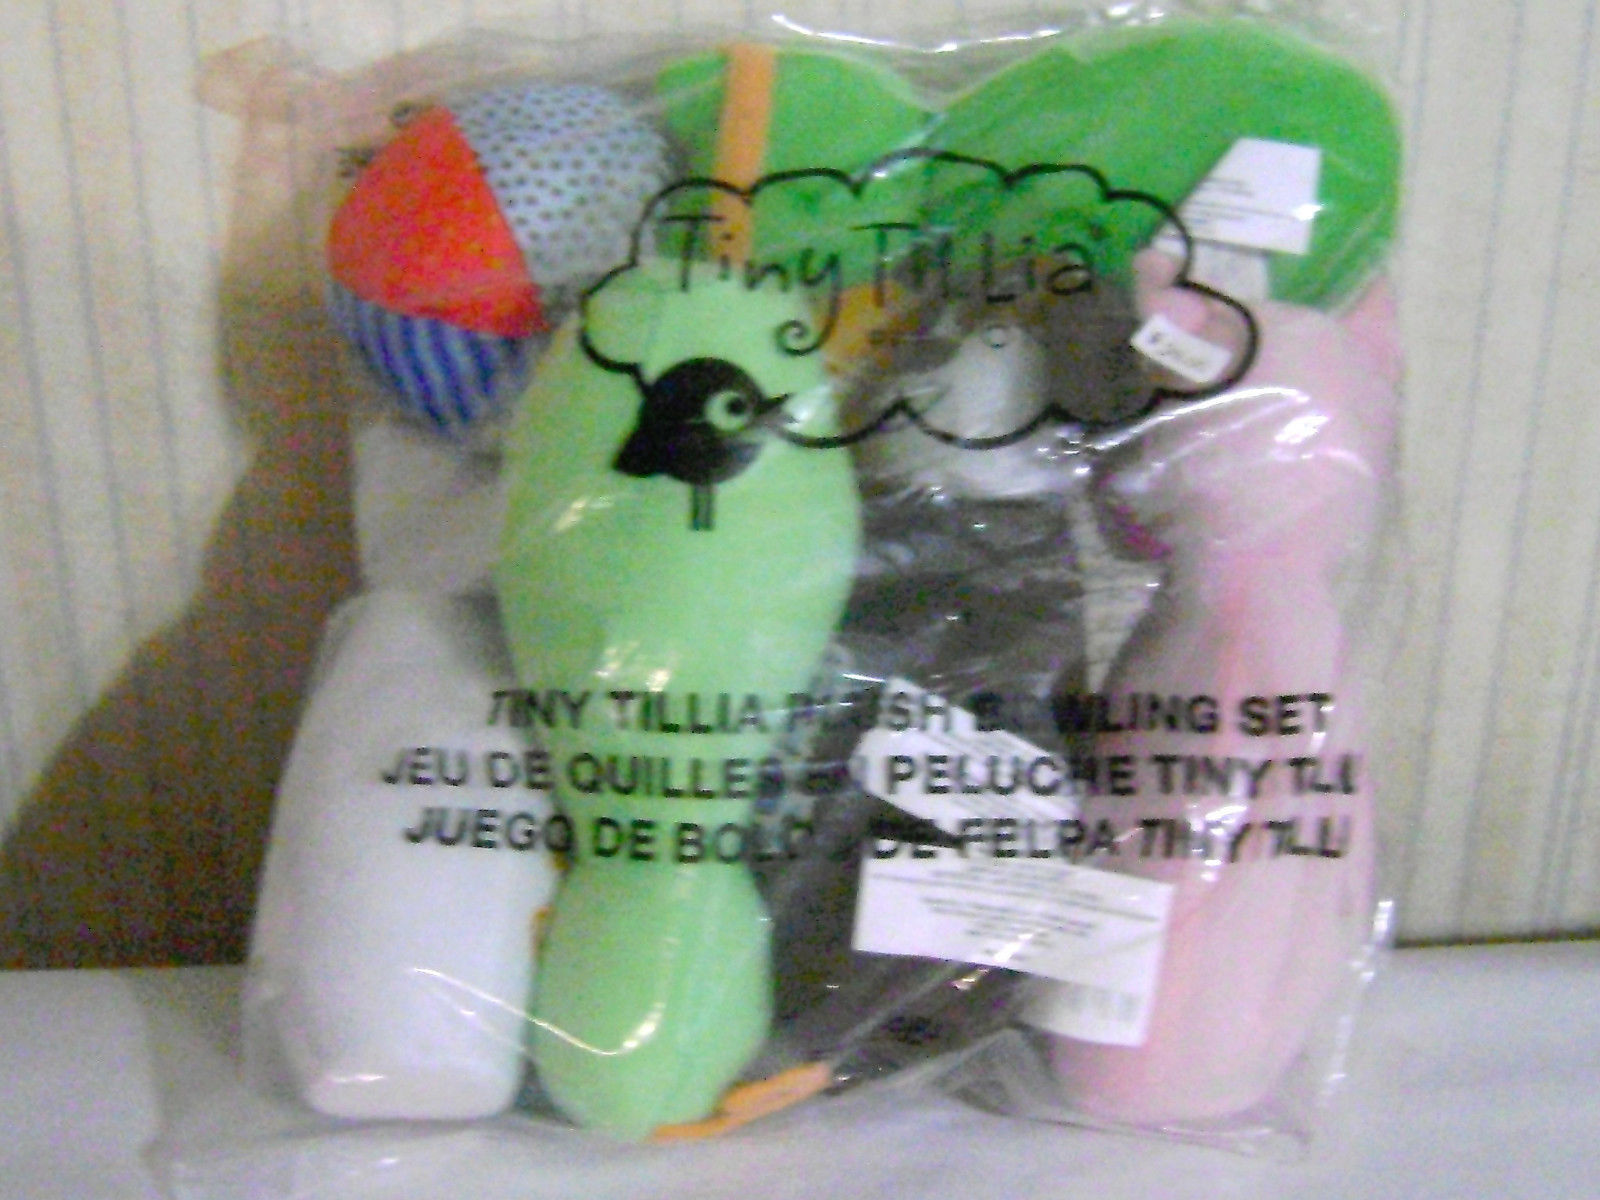 Primary image for Avon Tiny Tillia Plush Bowling Set - Soft & Safe - New in package! (Retired)